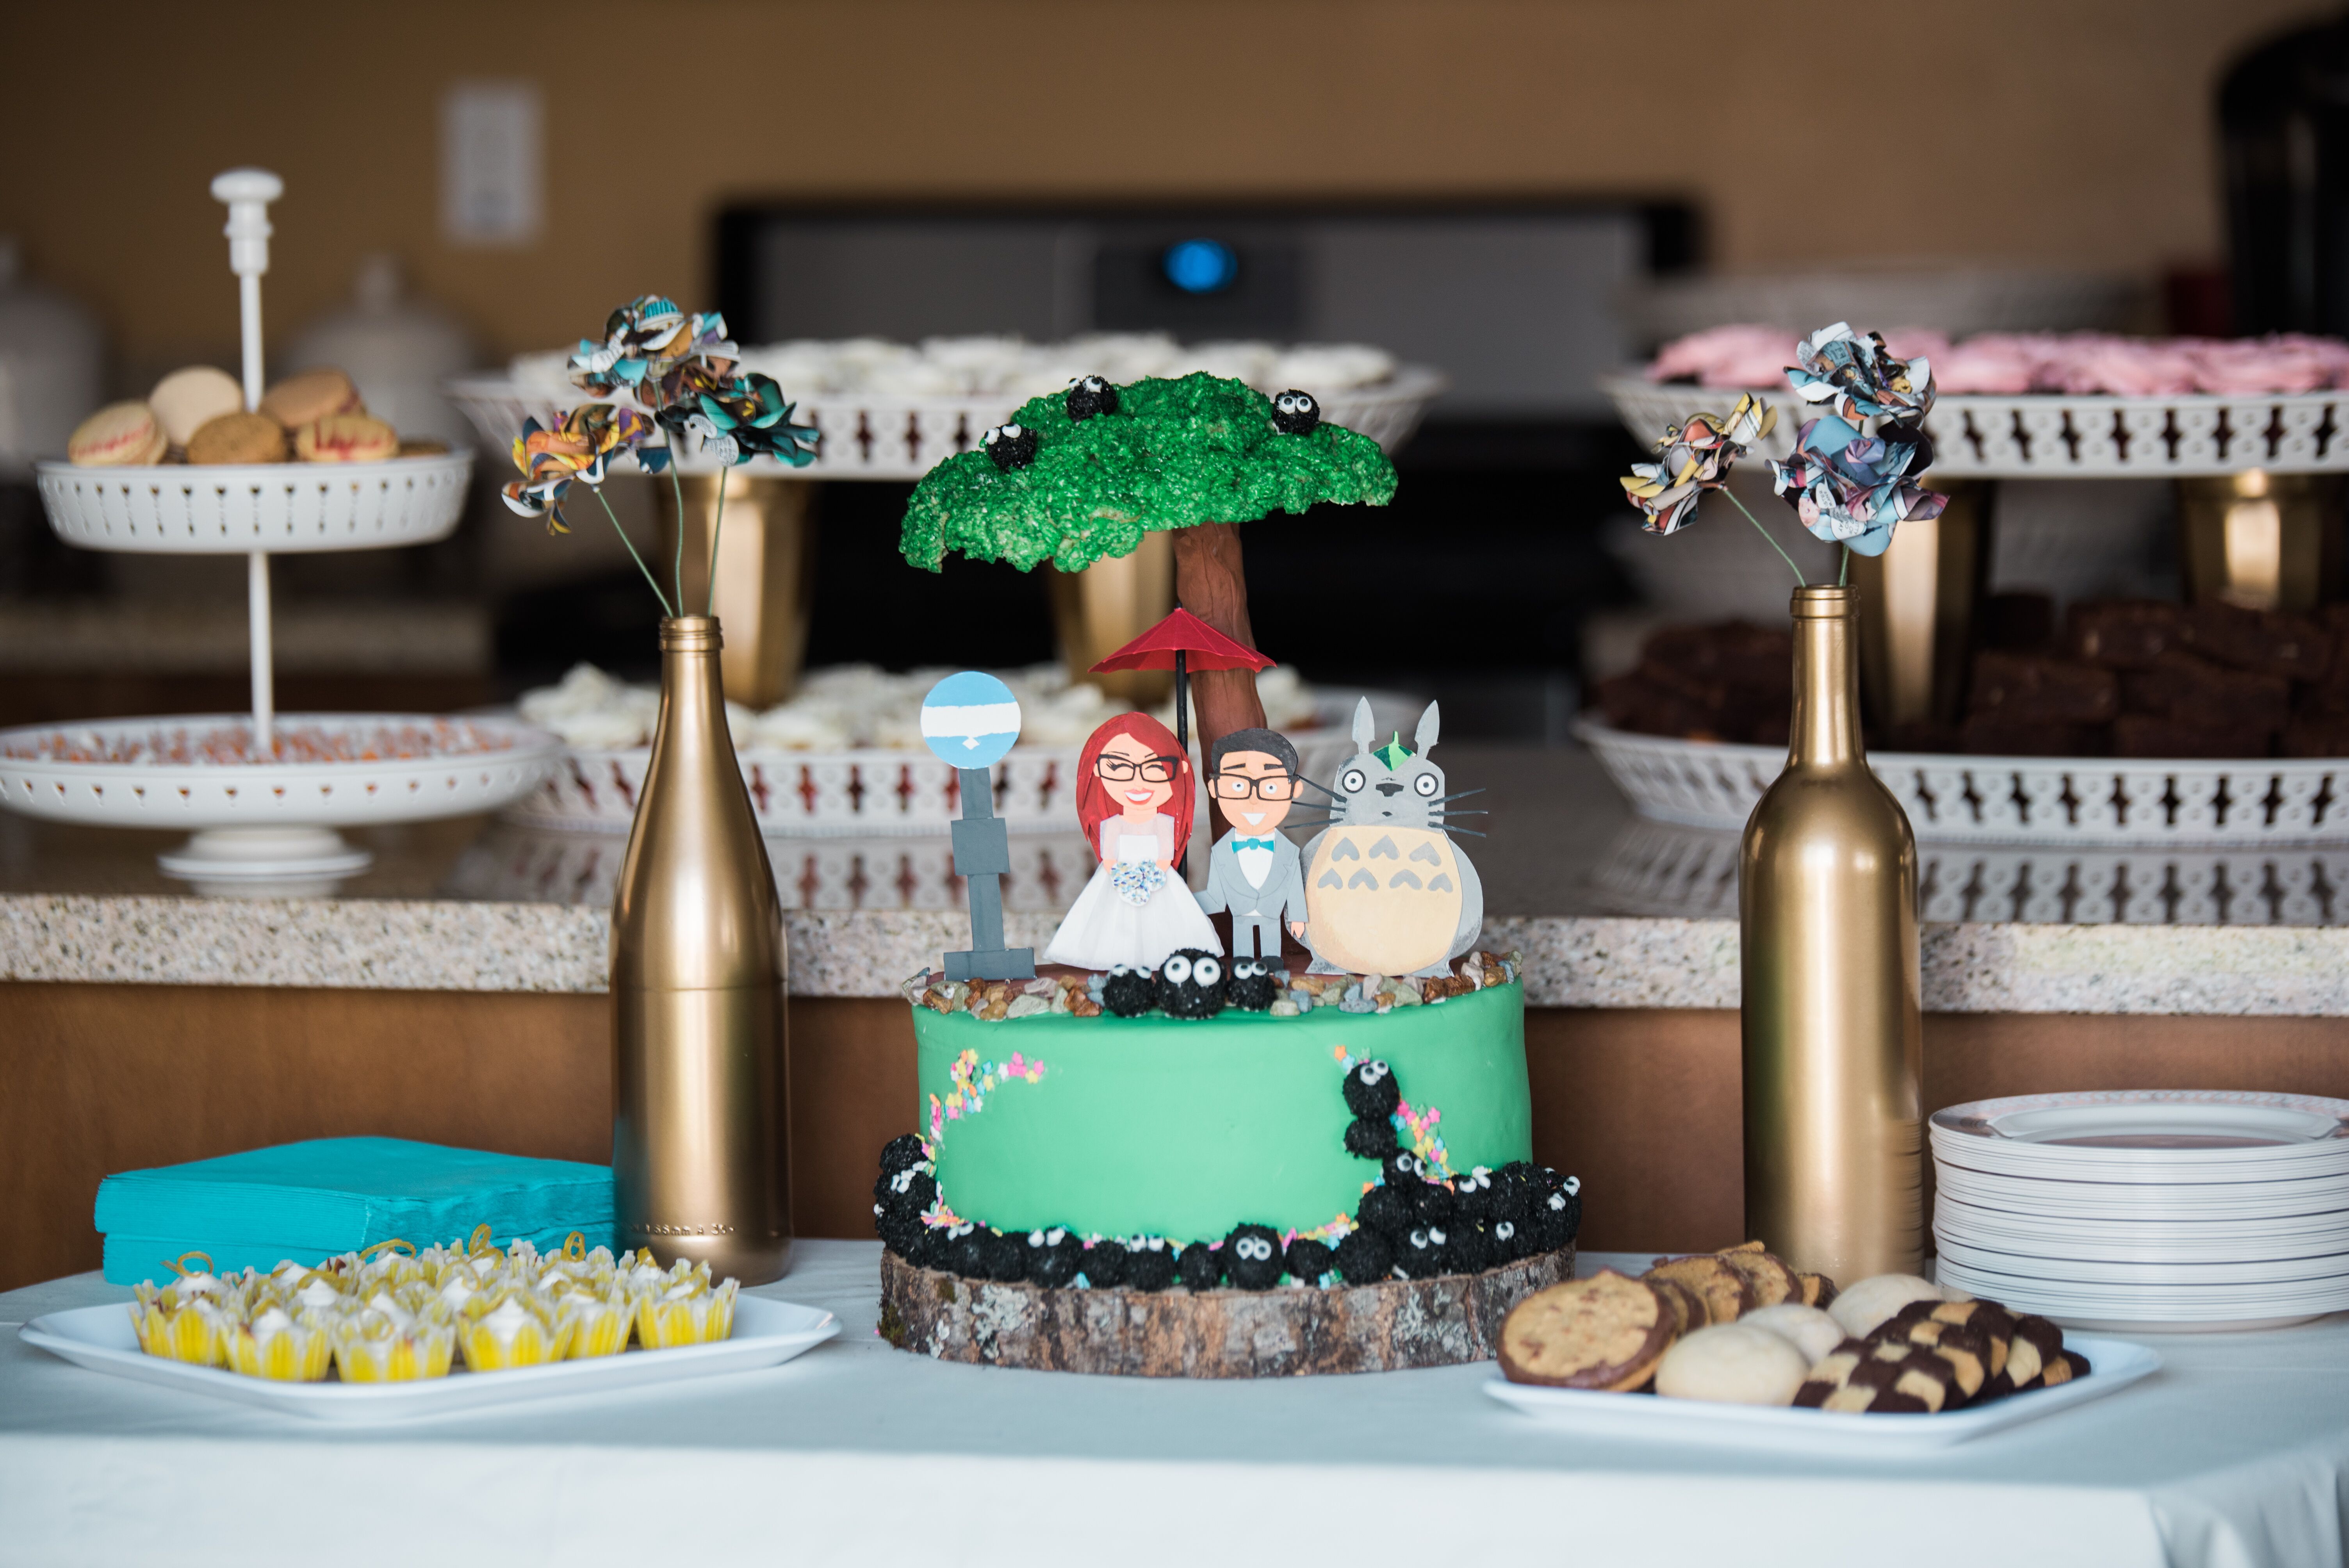 Personalized Anime Cake Topper